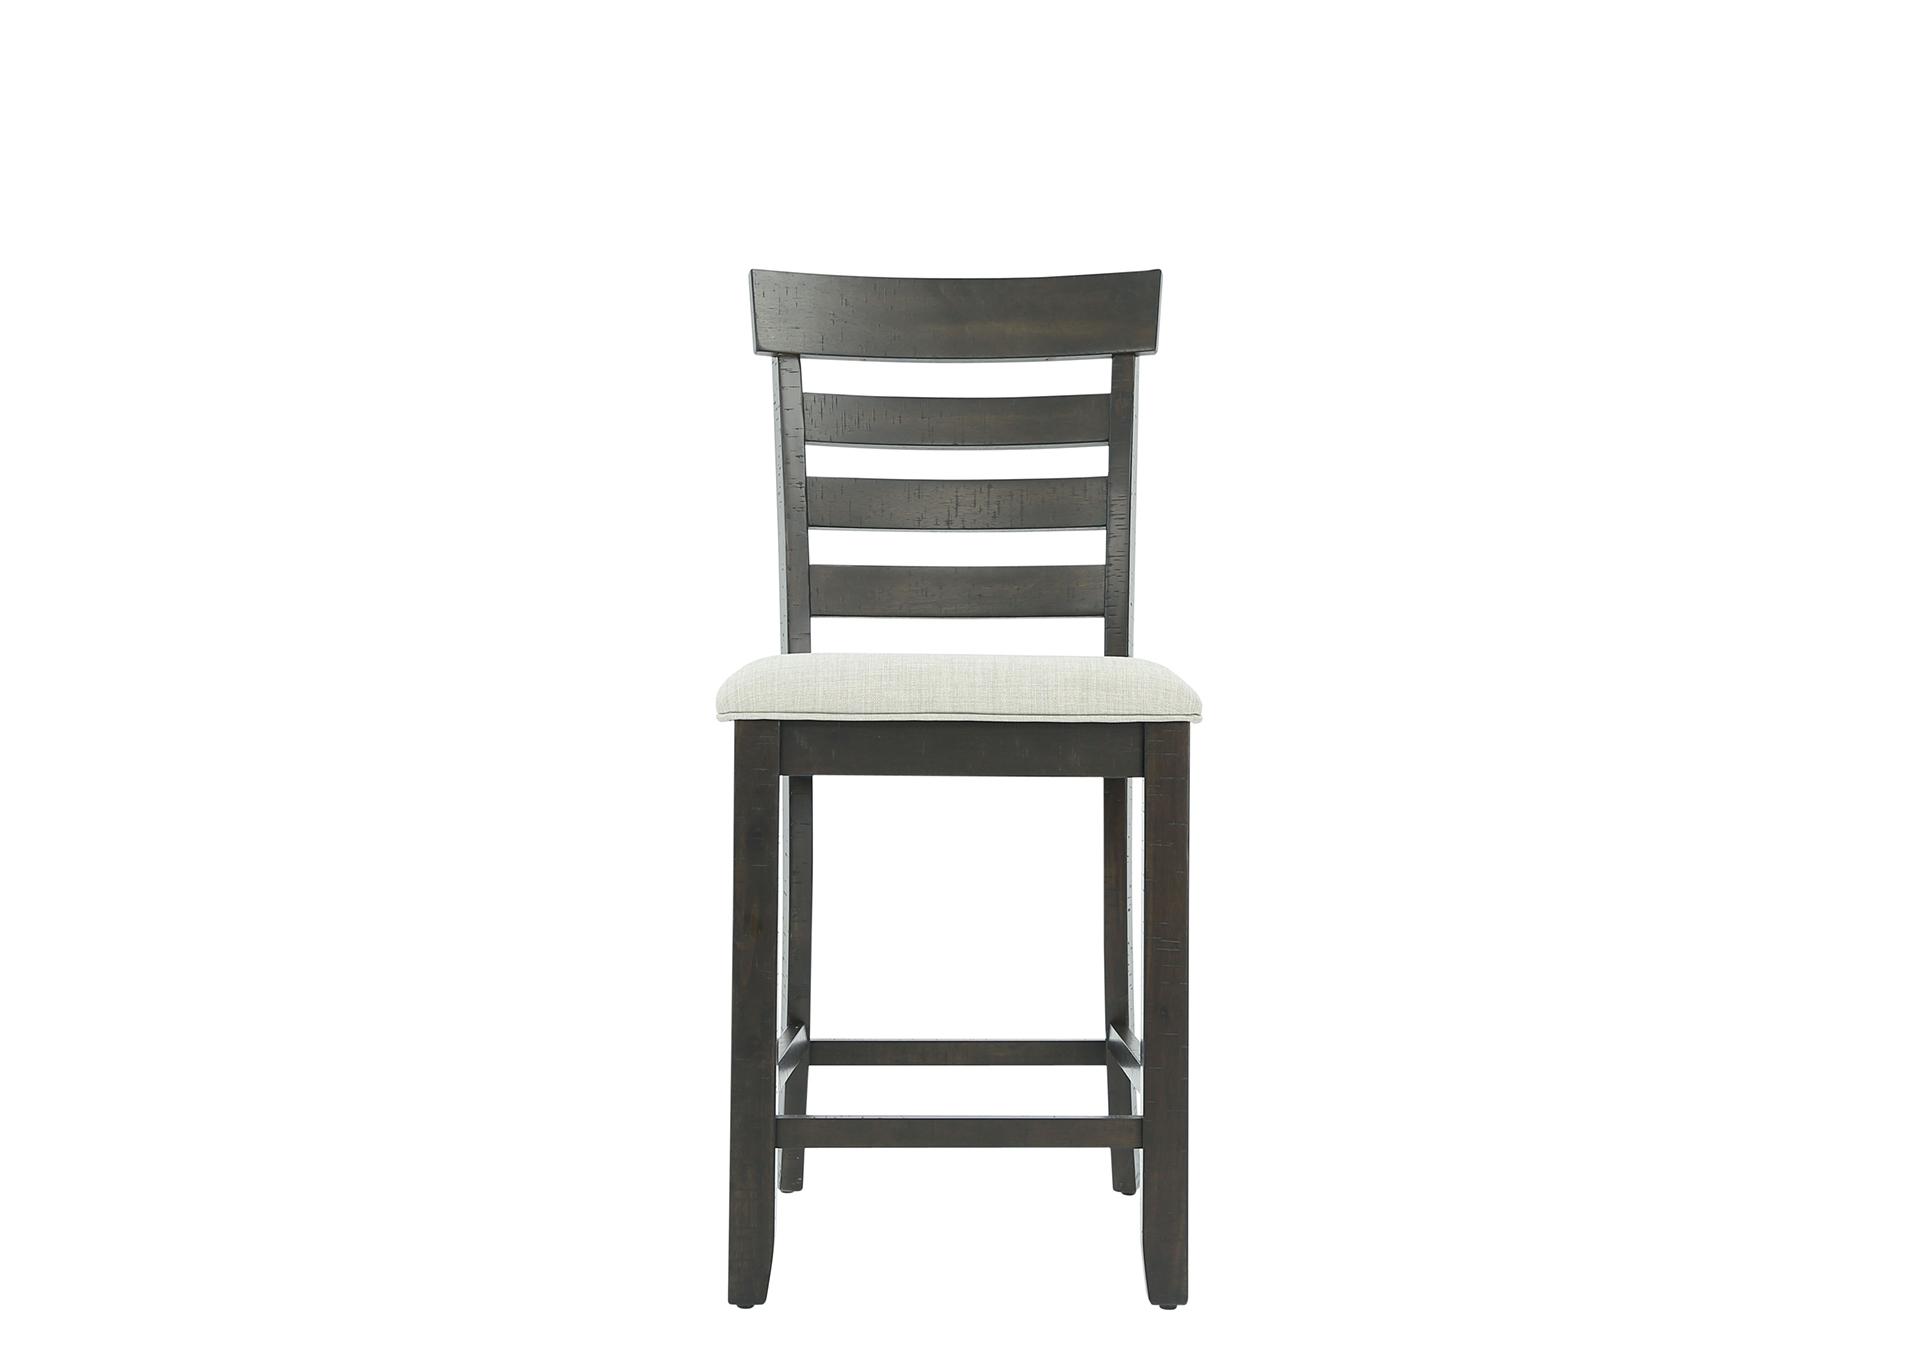 COLORADO COUNTER SIDE CHAIR,ELEMENTS INTERNATIONAL GROUP, LLC